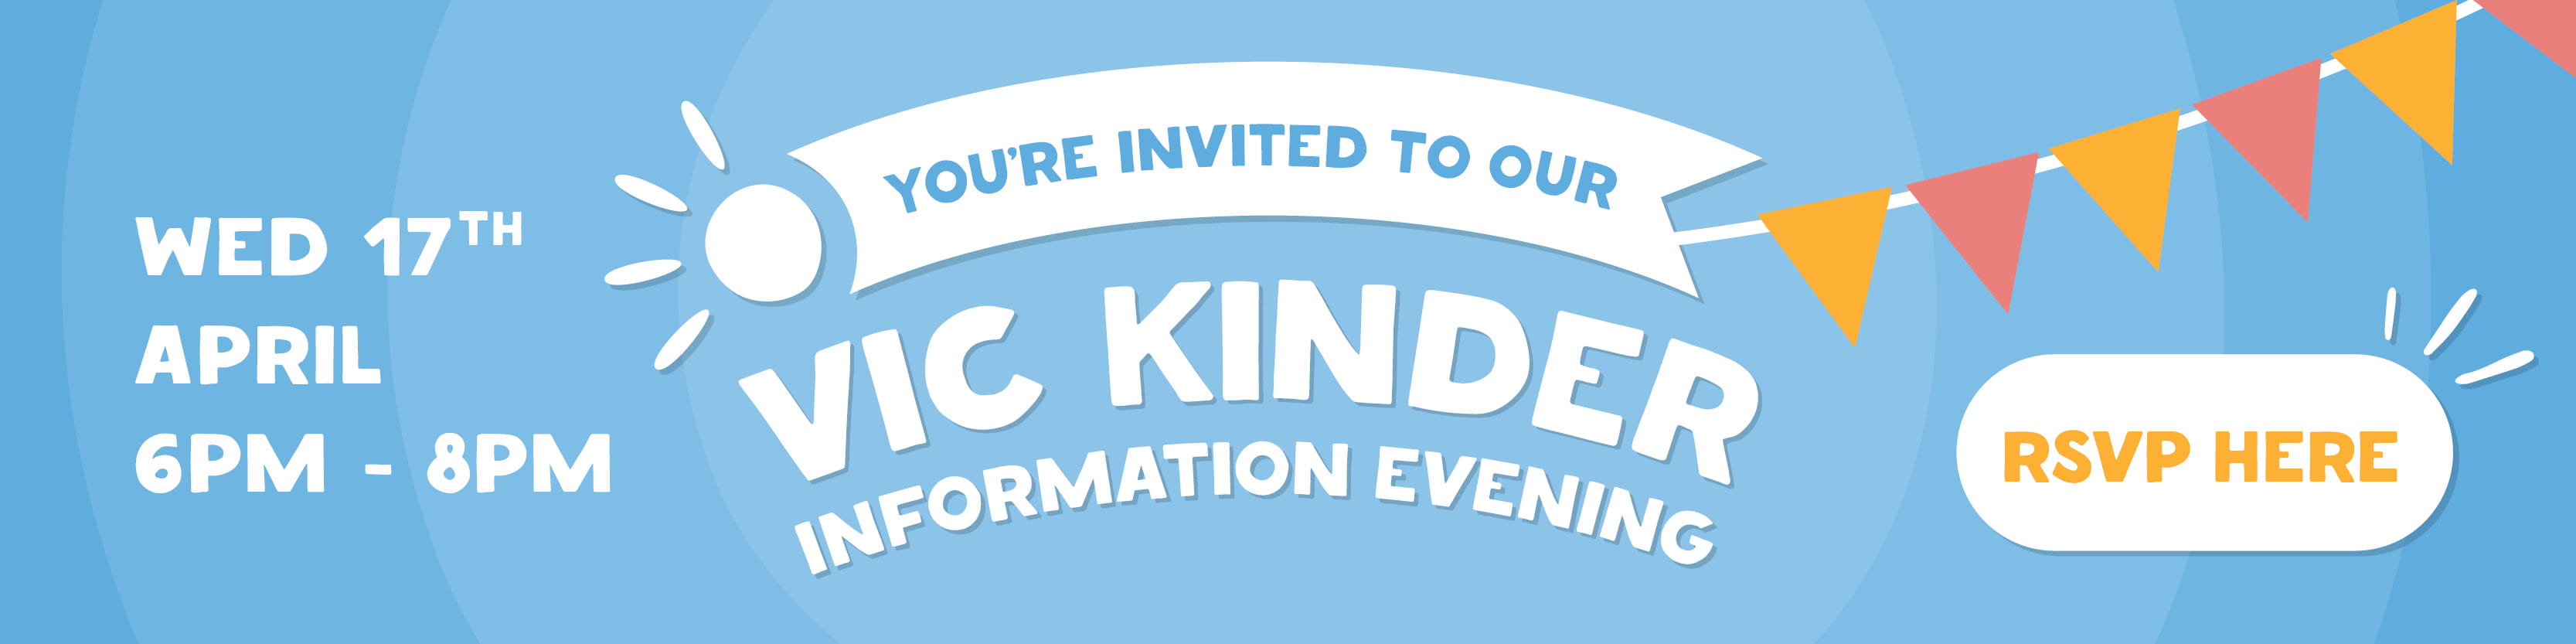 Come along to our kinder info night